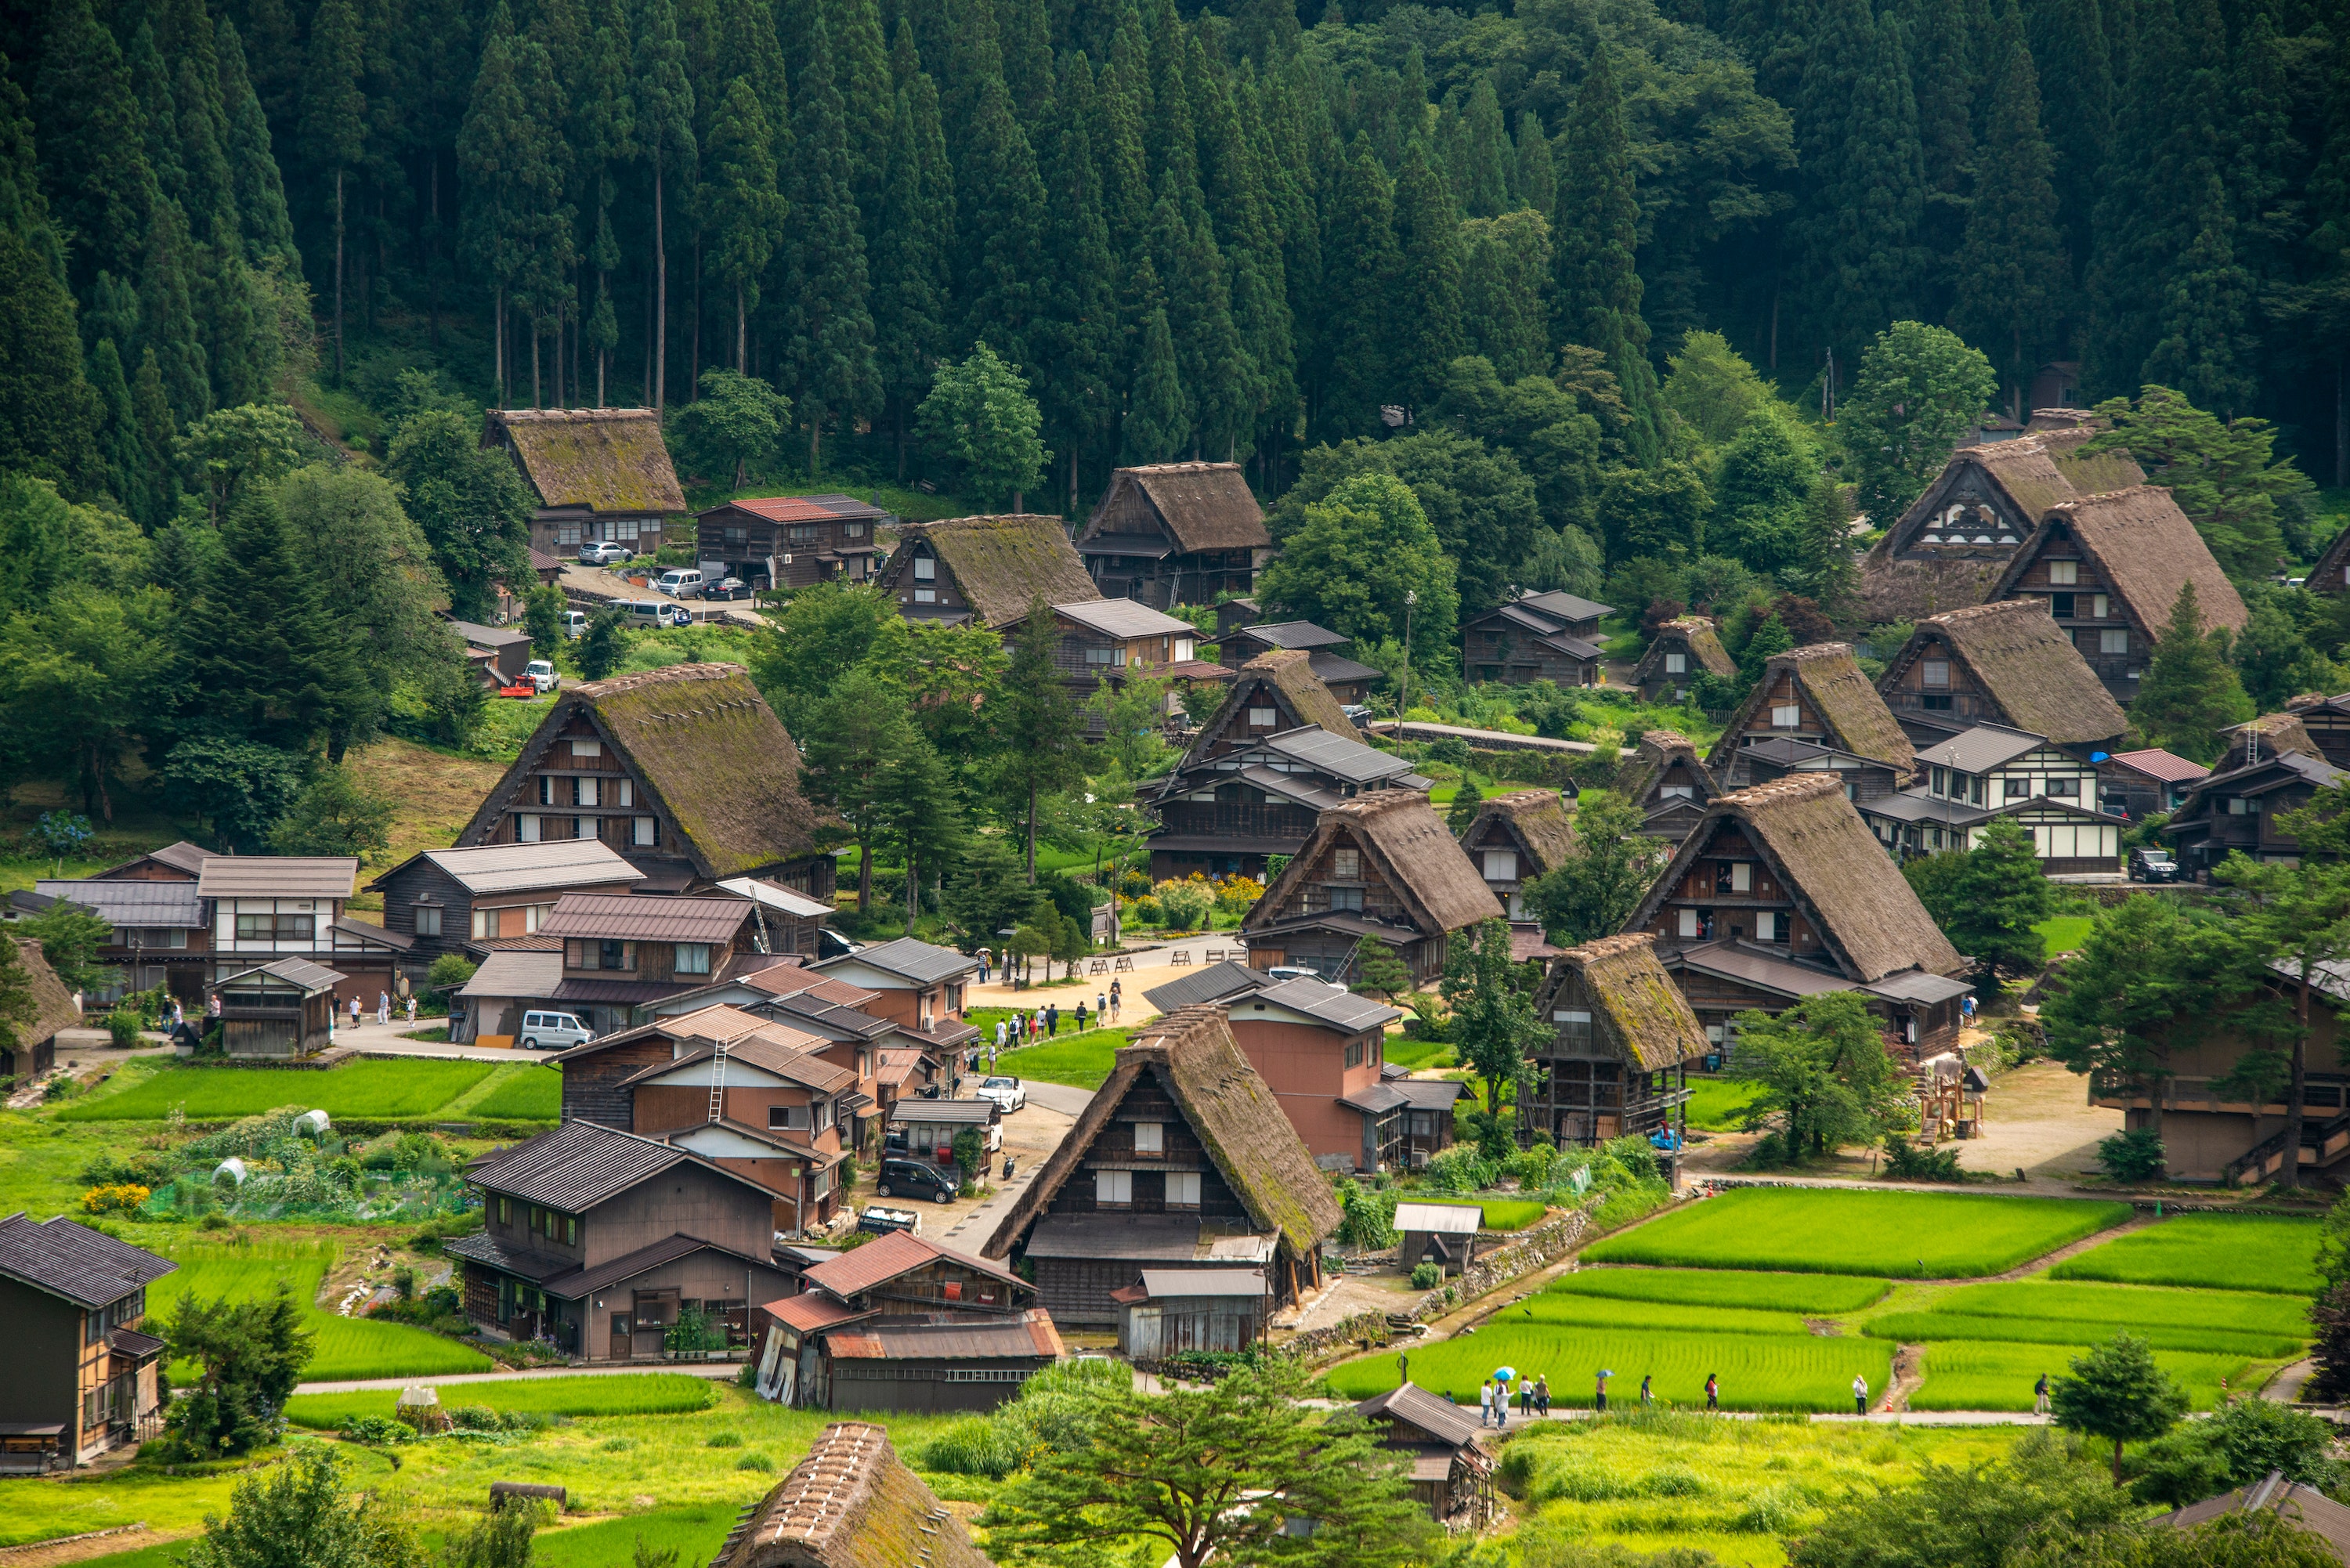 Nestled in Japan’s Shogawa River Valley, Ogimachi in the Shirakawa-go region is known for its Gassho-style farmhouses, which feature steeply slanted thatched roofs resembling hands in prayer. The steep roofs help shed the area’s abundant winter snow easily and create spacious attics, which were traditionally used for the cultivation of silkworms. Shirakawa-go, along with the neighboring region of Gokayama, was named a UNESCO World Heritage Site in 1995—and the farmhouses, some of which are over 250 years old, have become a popular attraction.<p>Sign up for our newsletter to get the latest in design, decorating, celebrity style, shopping, and more.</p><a href="https://www.architecturaldigest.com/newsletter/subscribe?sourceCode=msnsend">Sign Up Now</a>